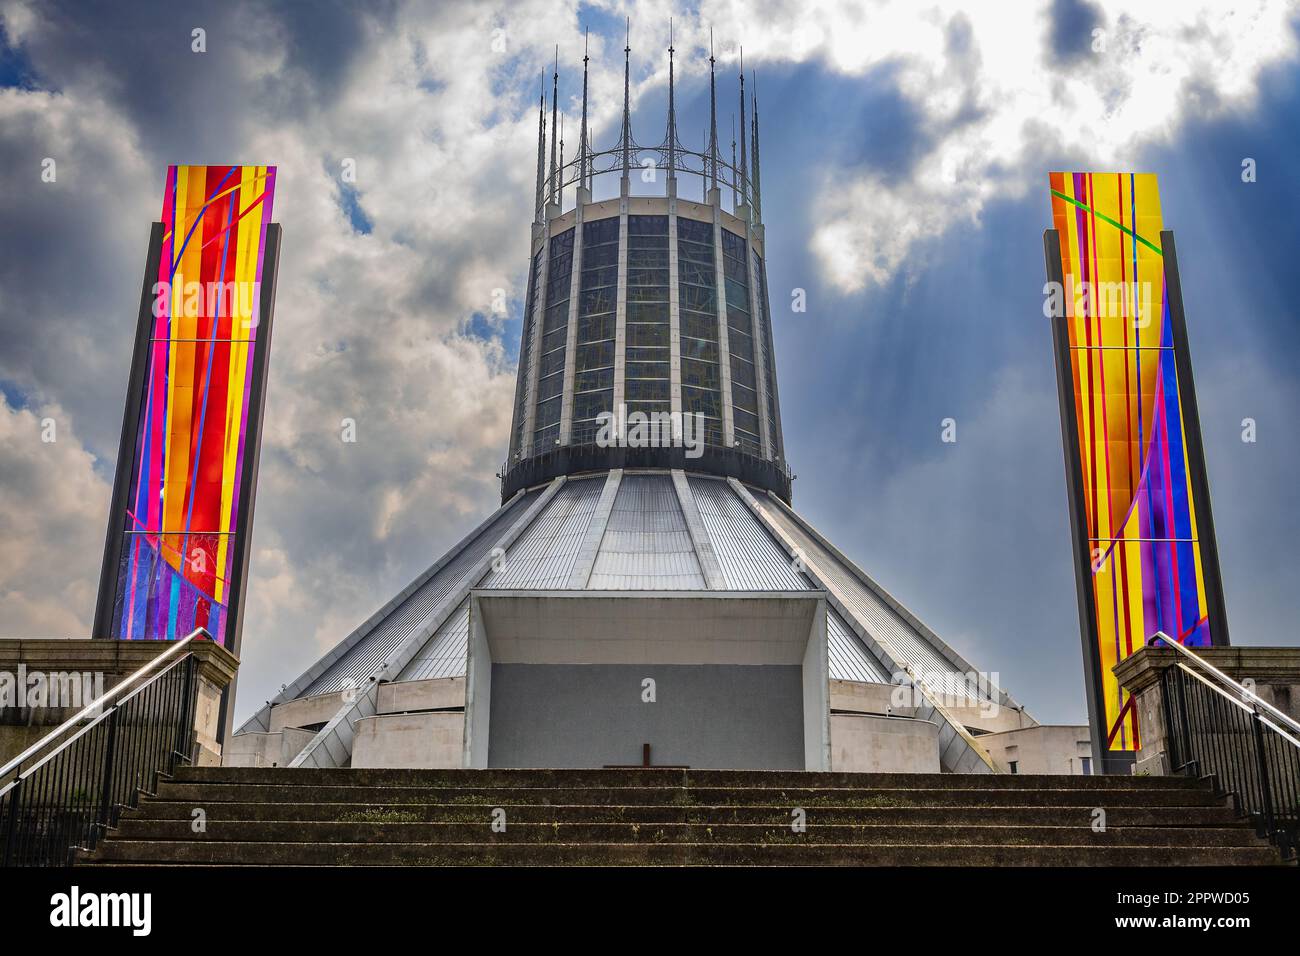 Liverpool Metroploitain roman catholic cathedral of Christ the King on Mount Pleasant in Liverpool. Also know locally as Paddy's Wigwam. Stock Photo